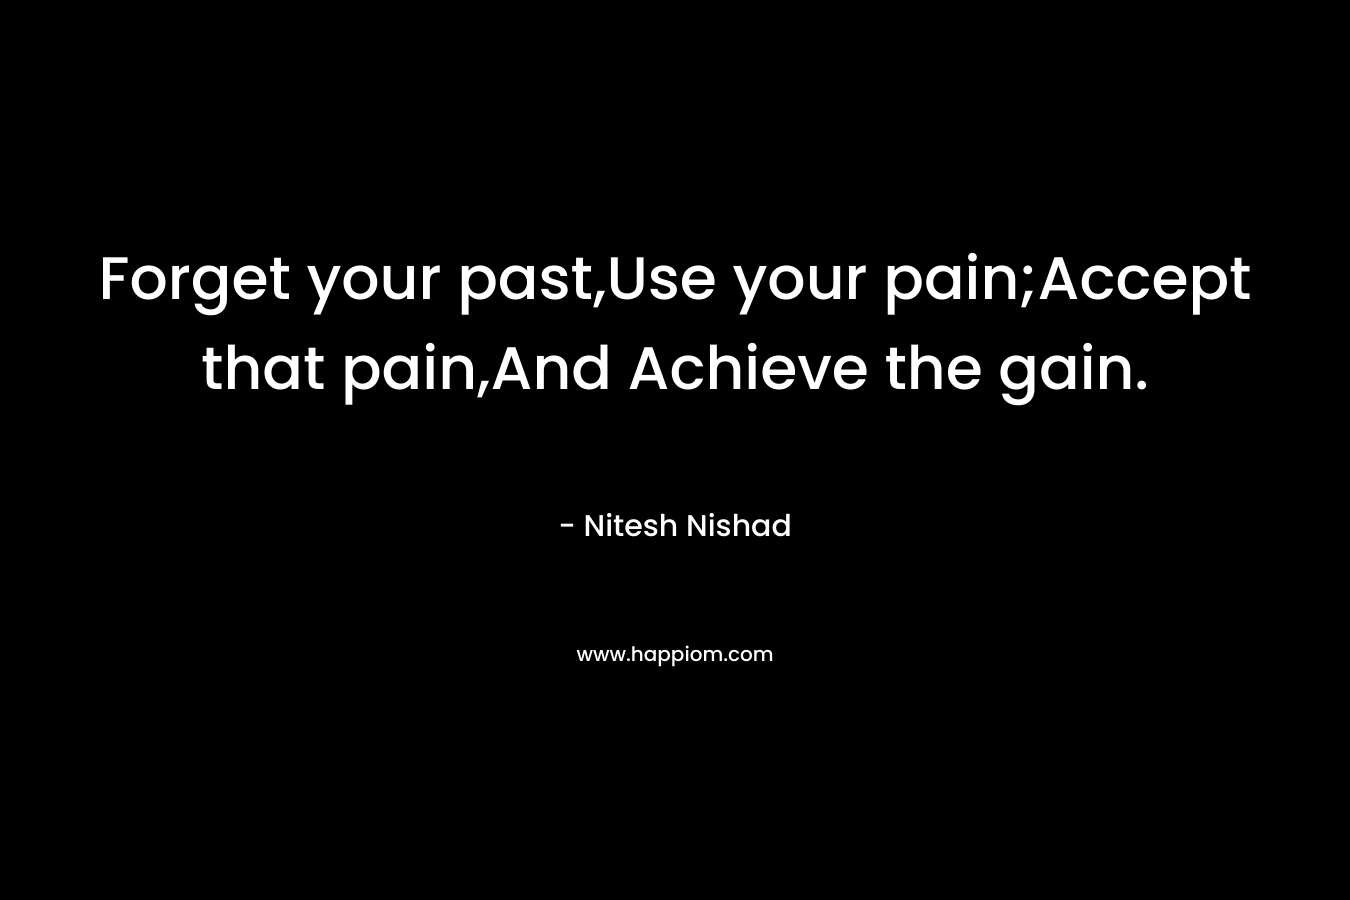 Forget your past,Use your pain;Accept that pain,And Achieve the gain.